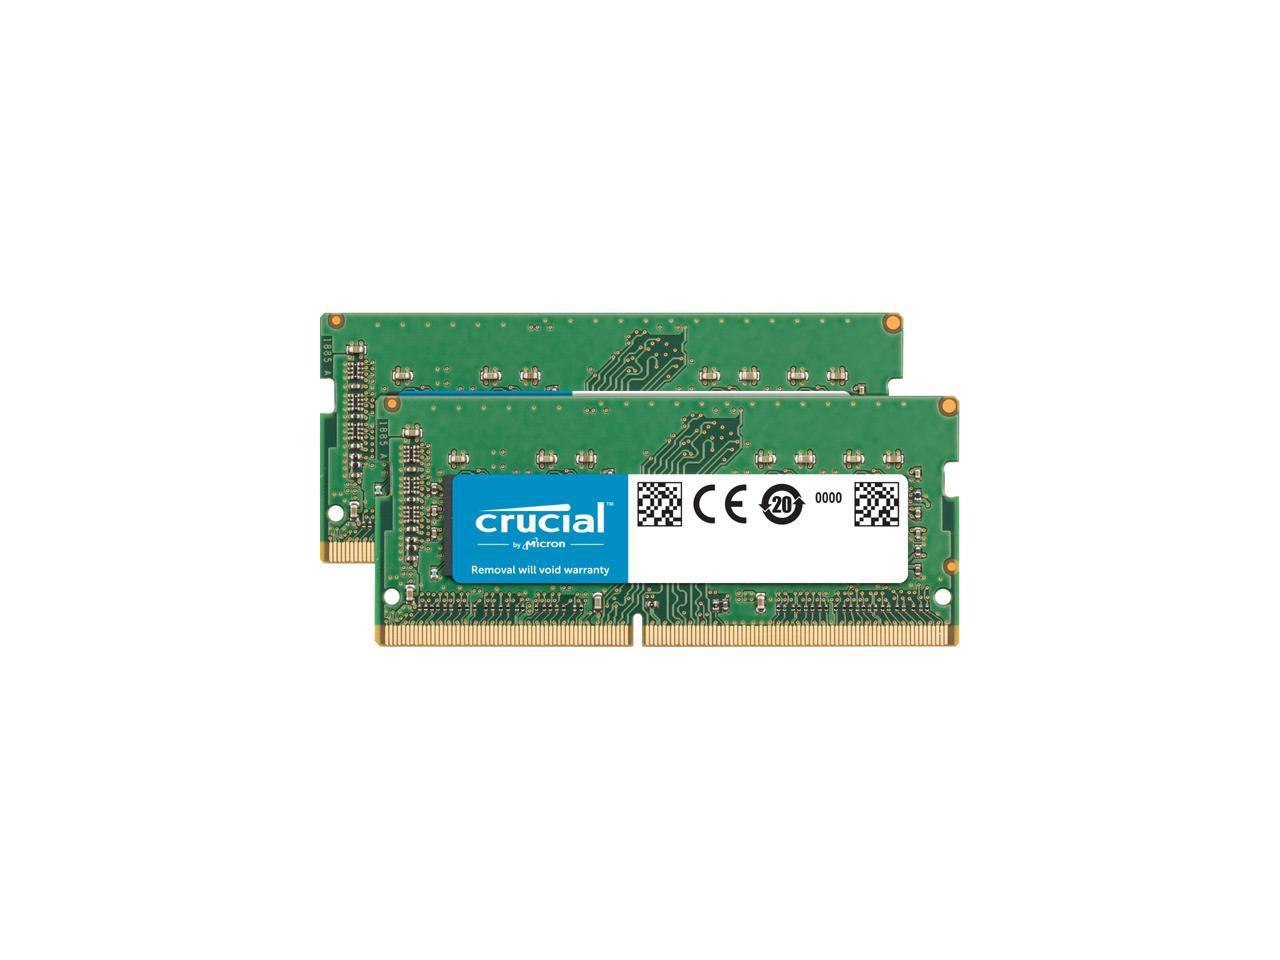 Crucial 32GB (2 X 16GB) DDR4 2666 (PC4 21300) Unbuffered Memory For Apple Model CT2K16G4S266M